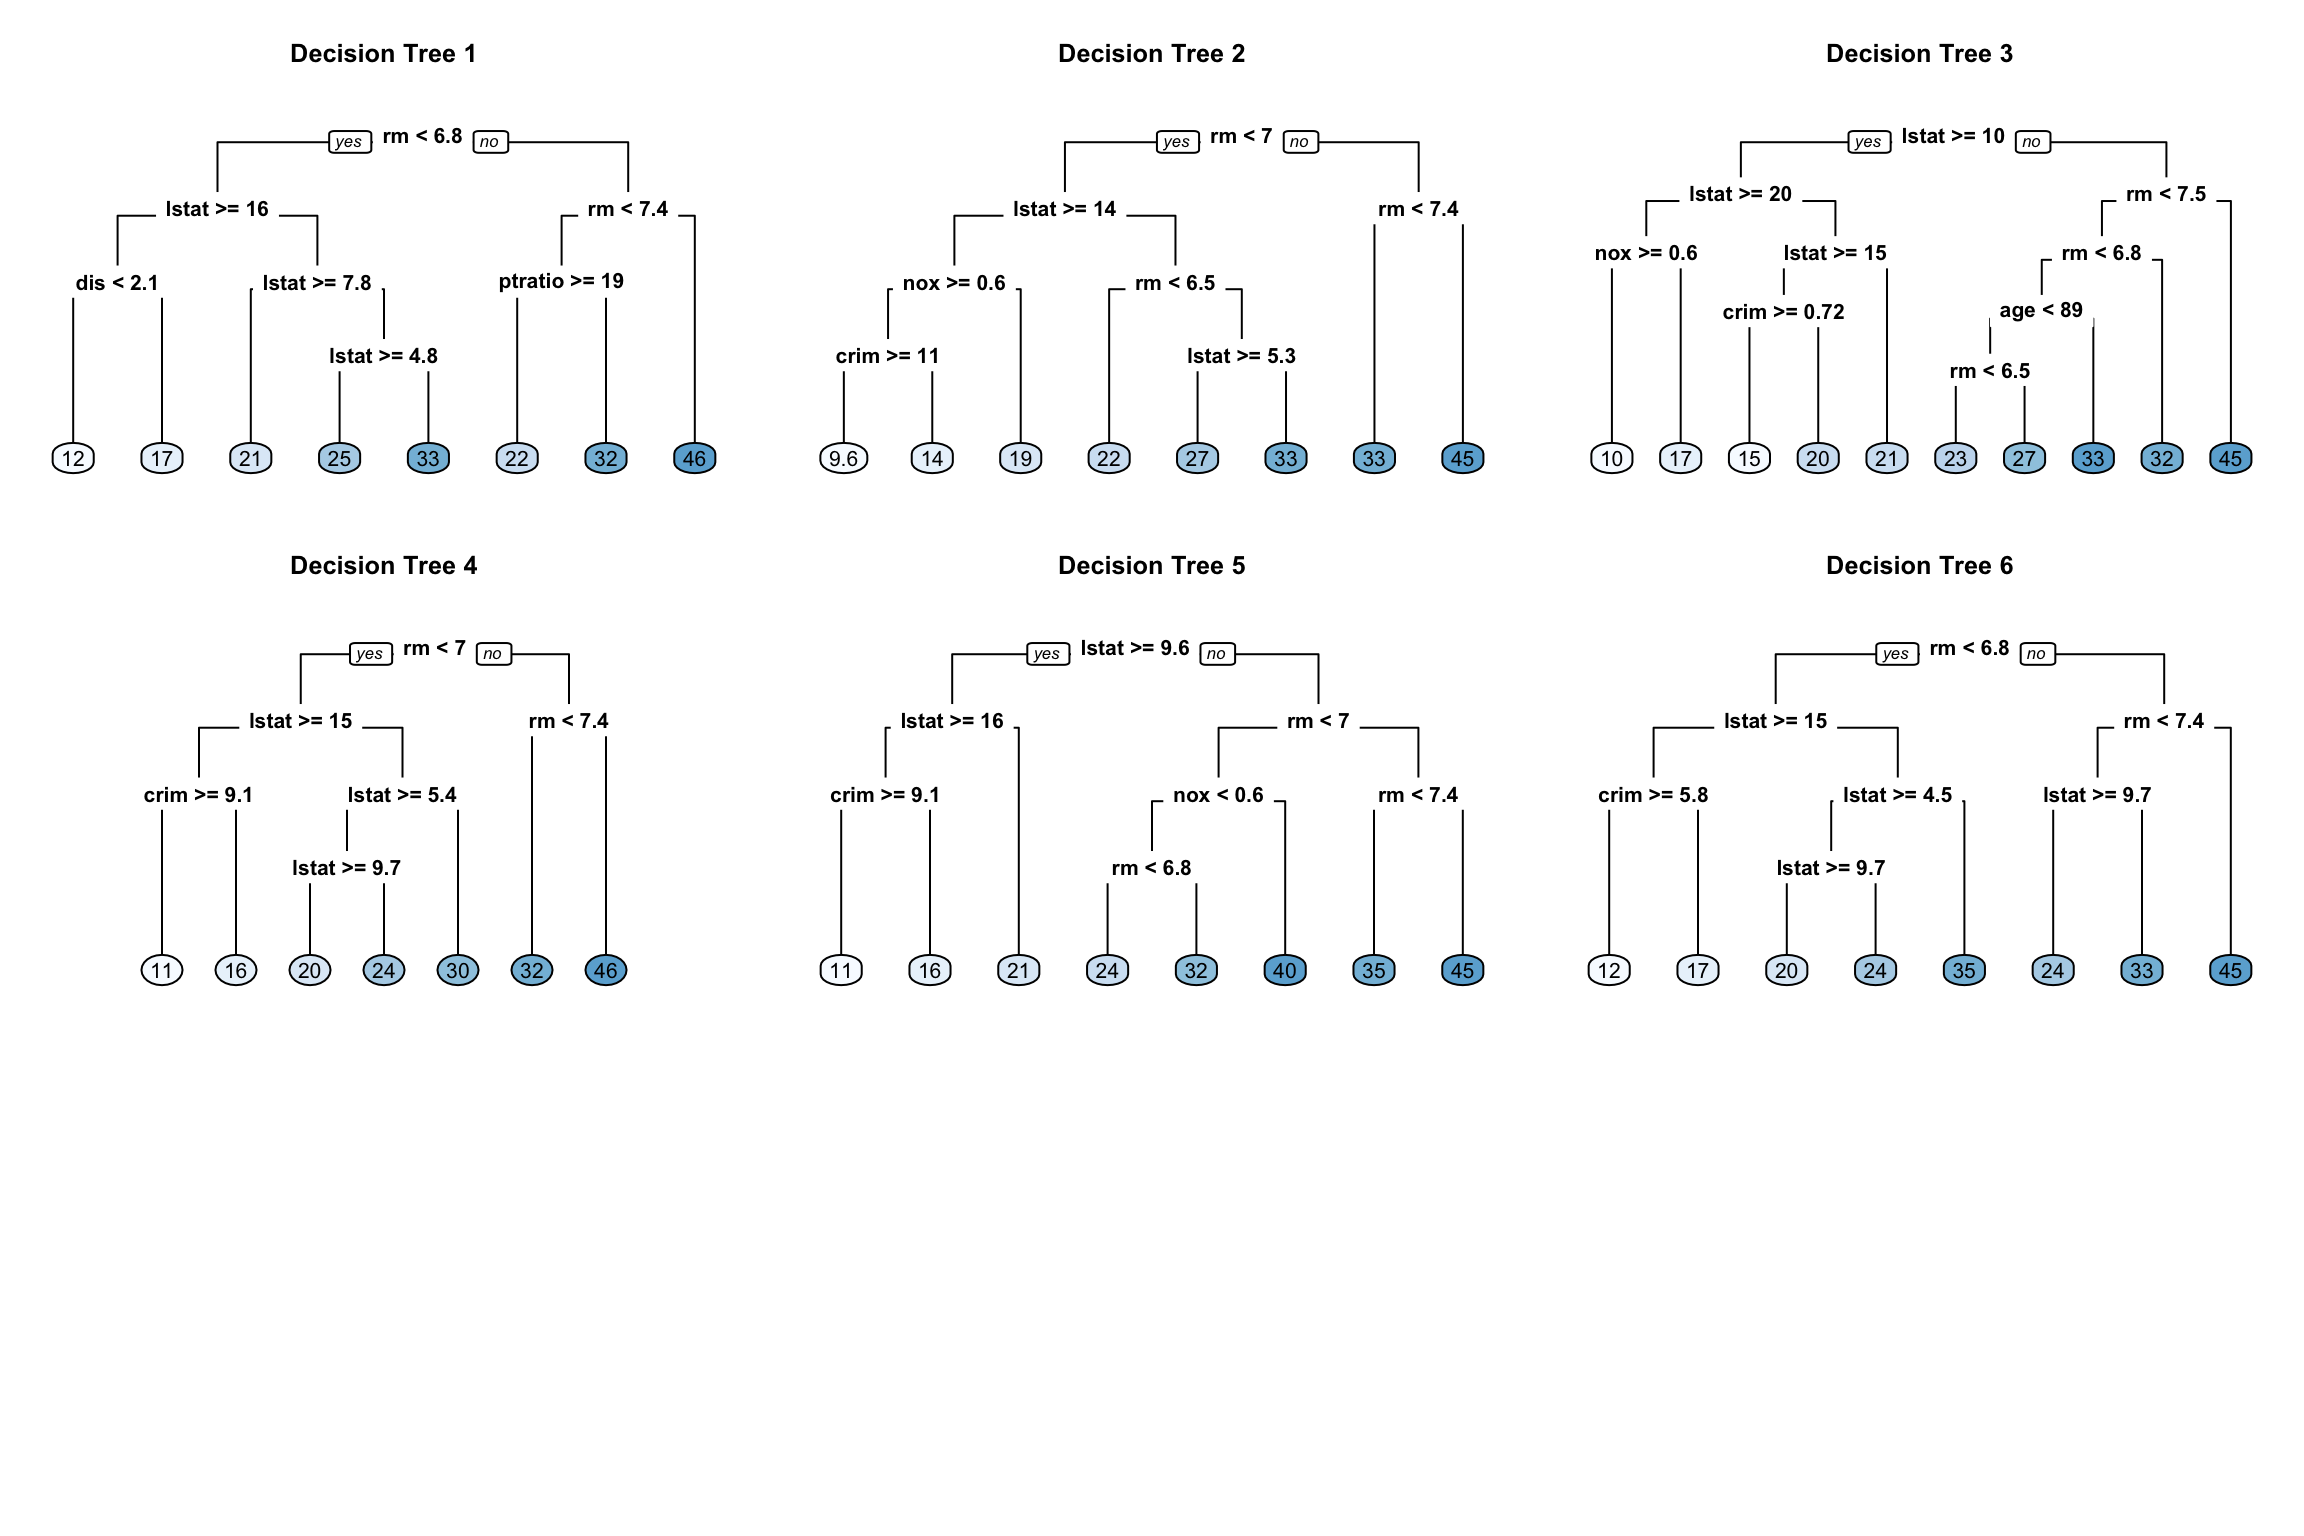 Six decision trees based on different bootstrap samples.